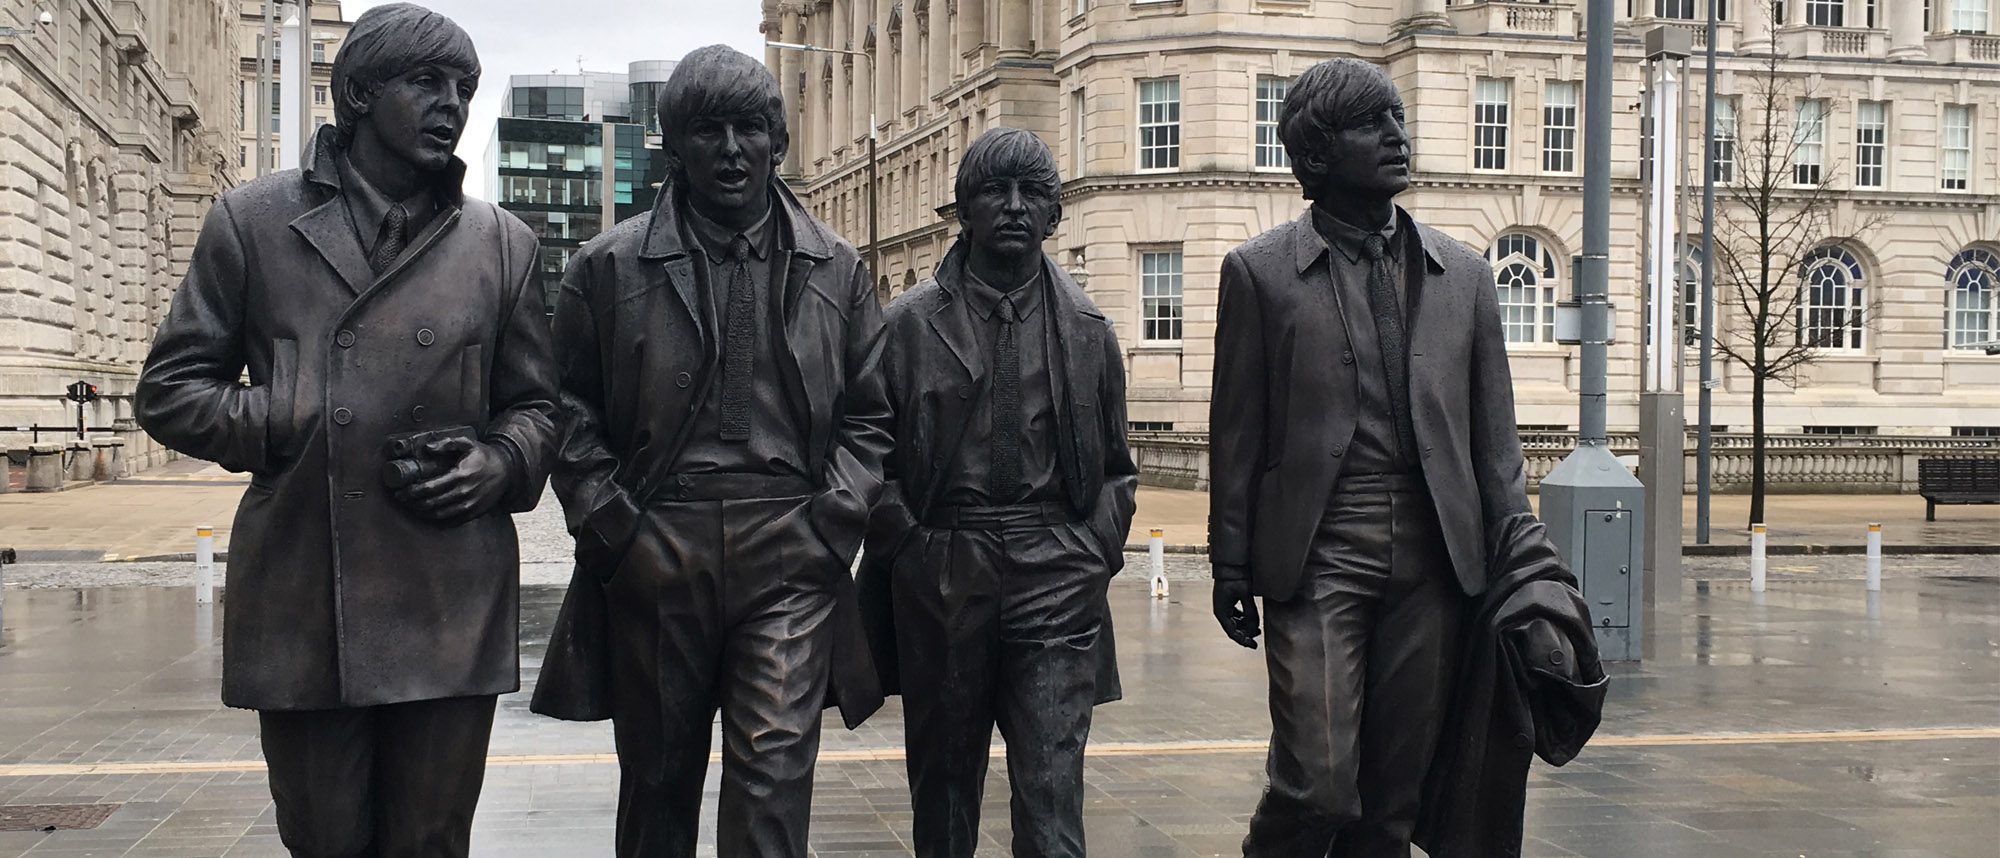 Liverpool The Beatles